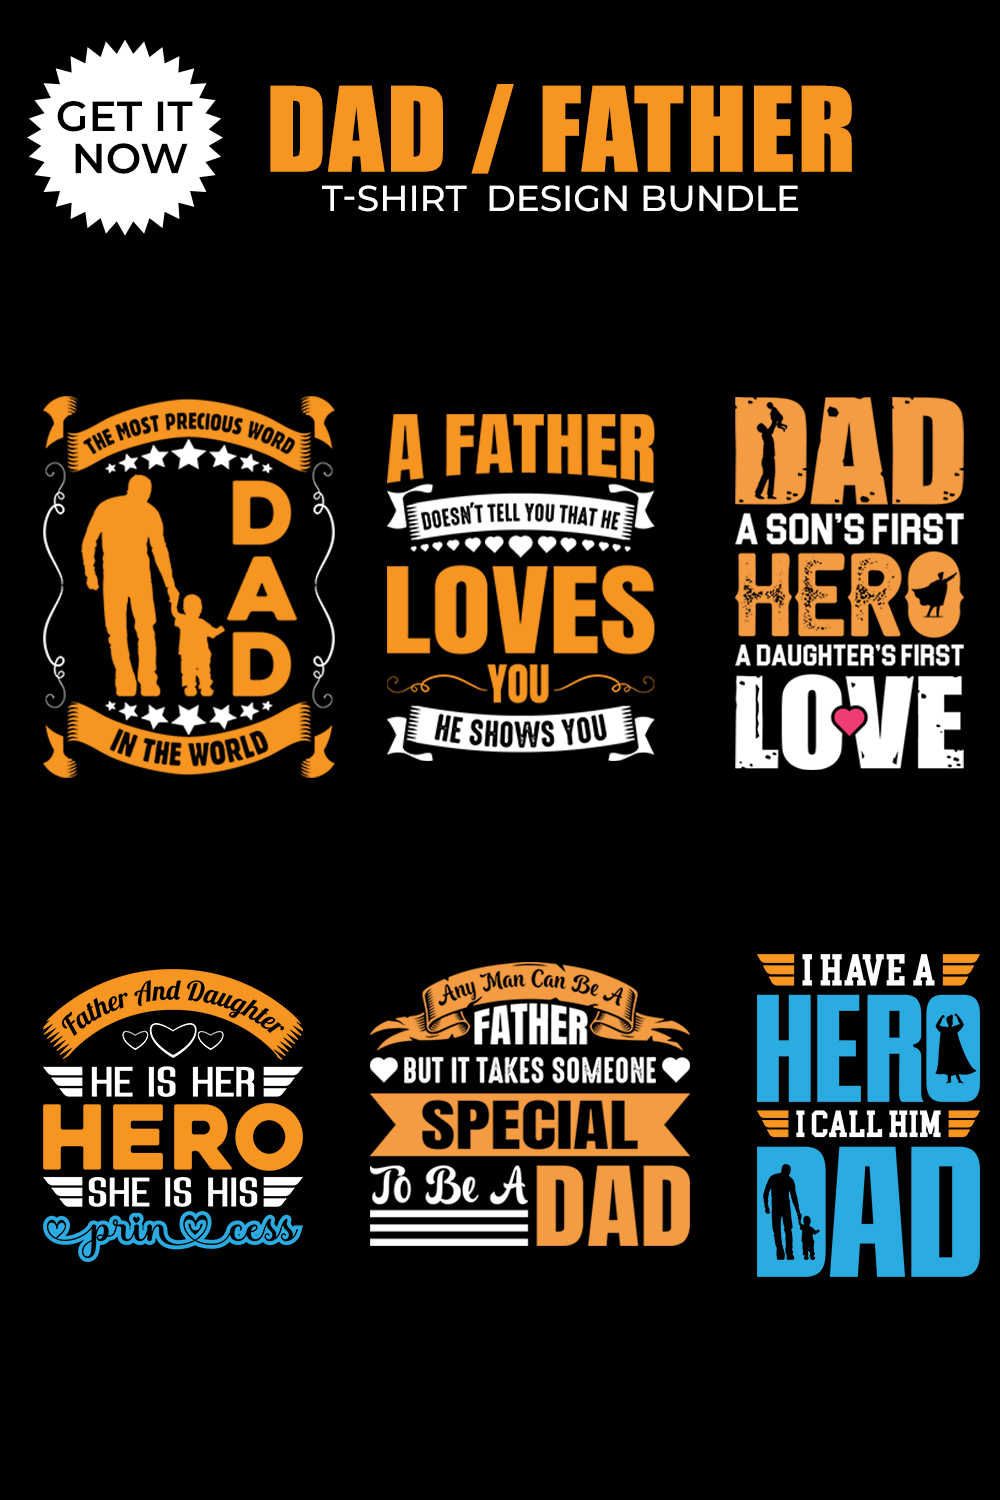 6 Dad/ father t shirt design bundle for father's day pinterest preview image.